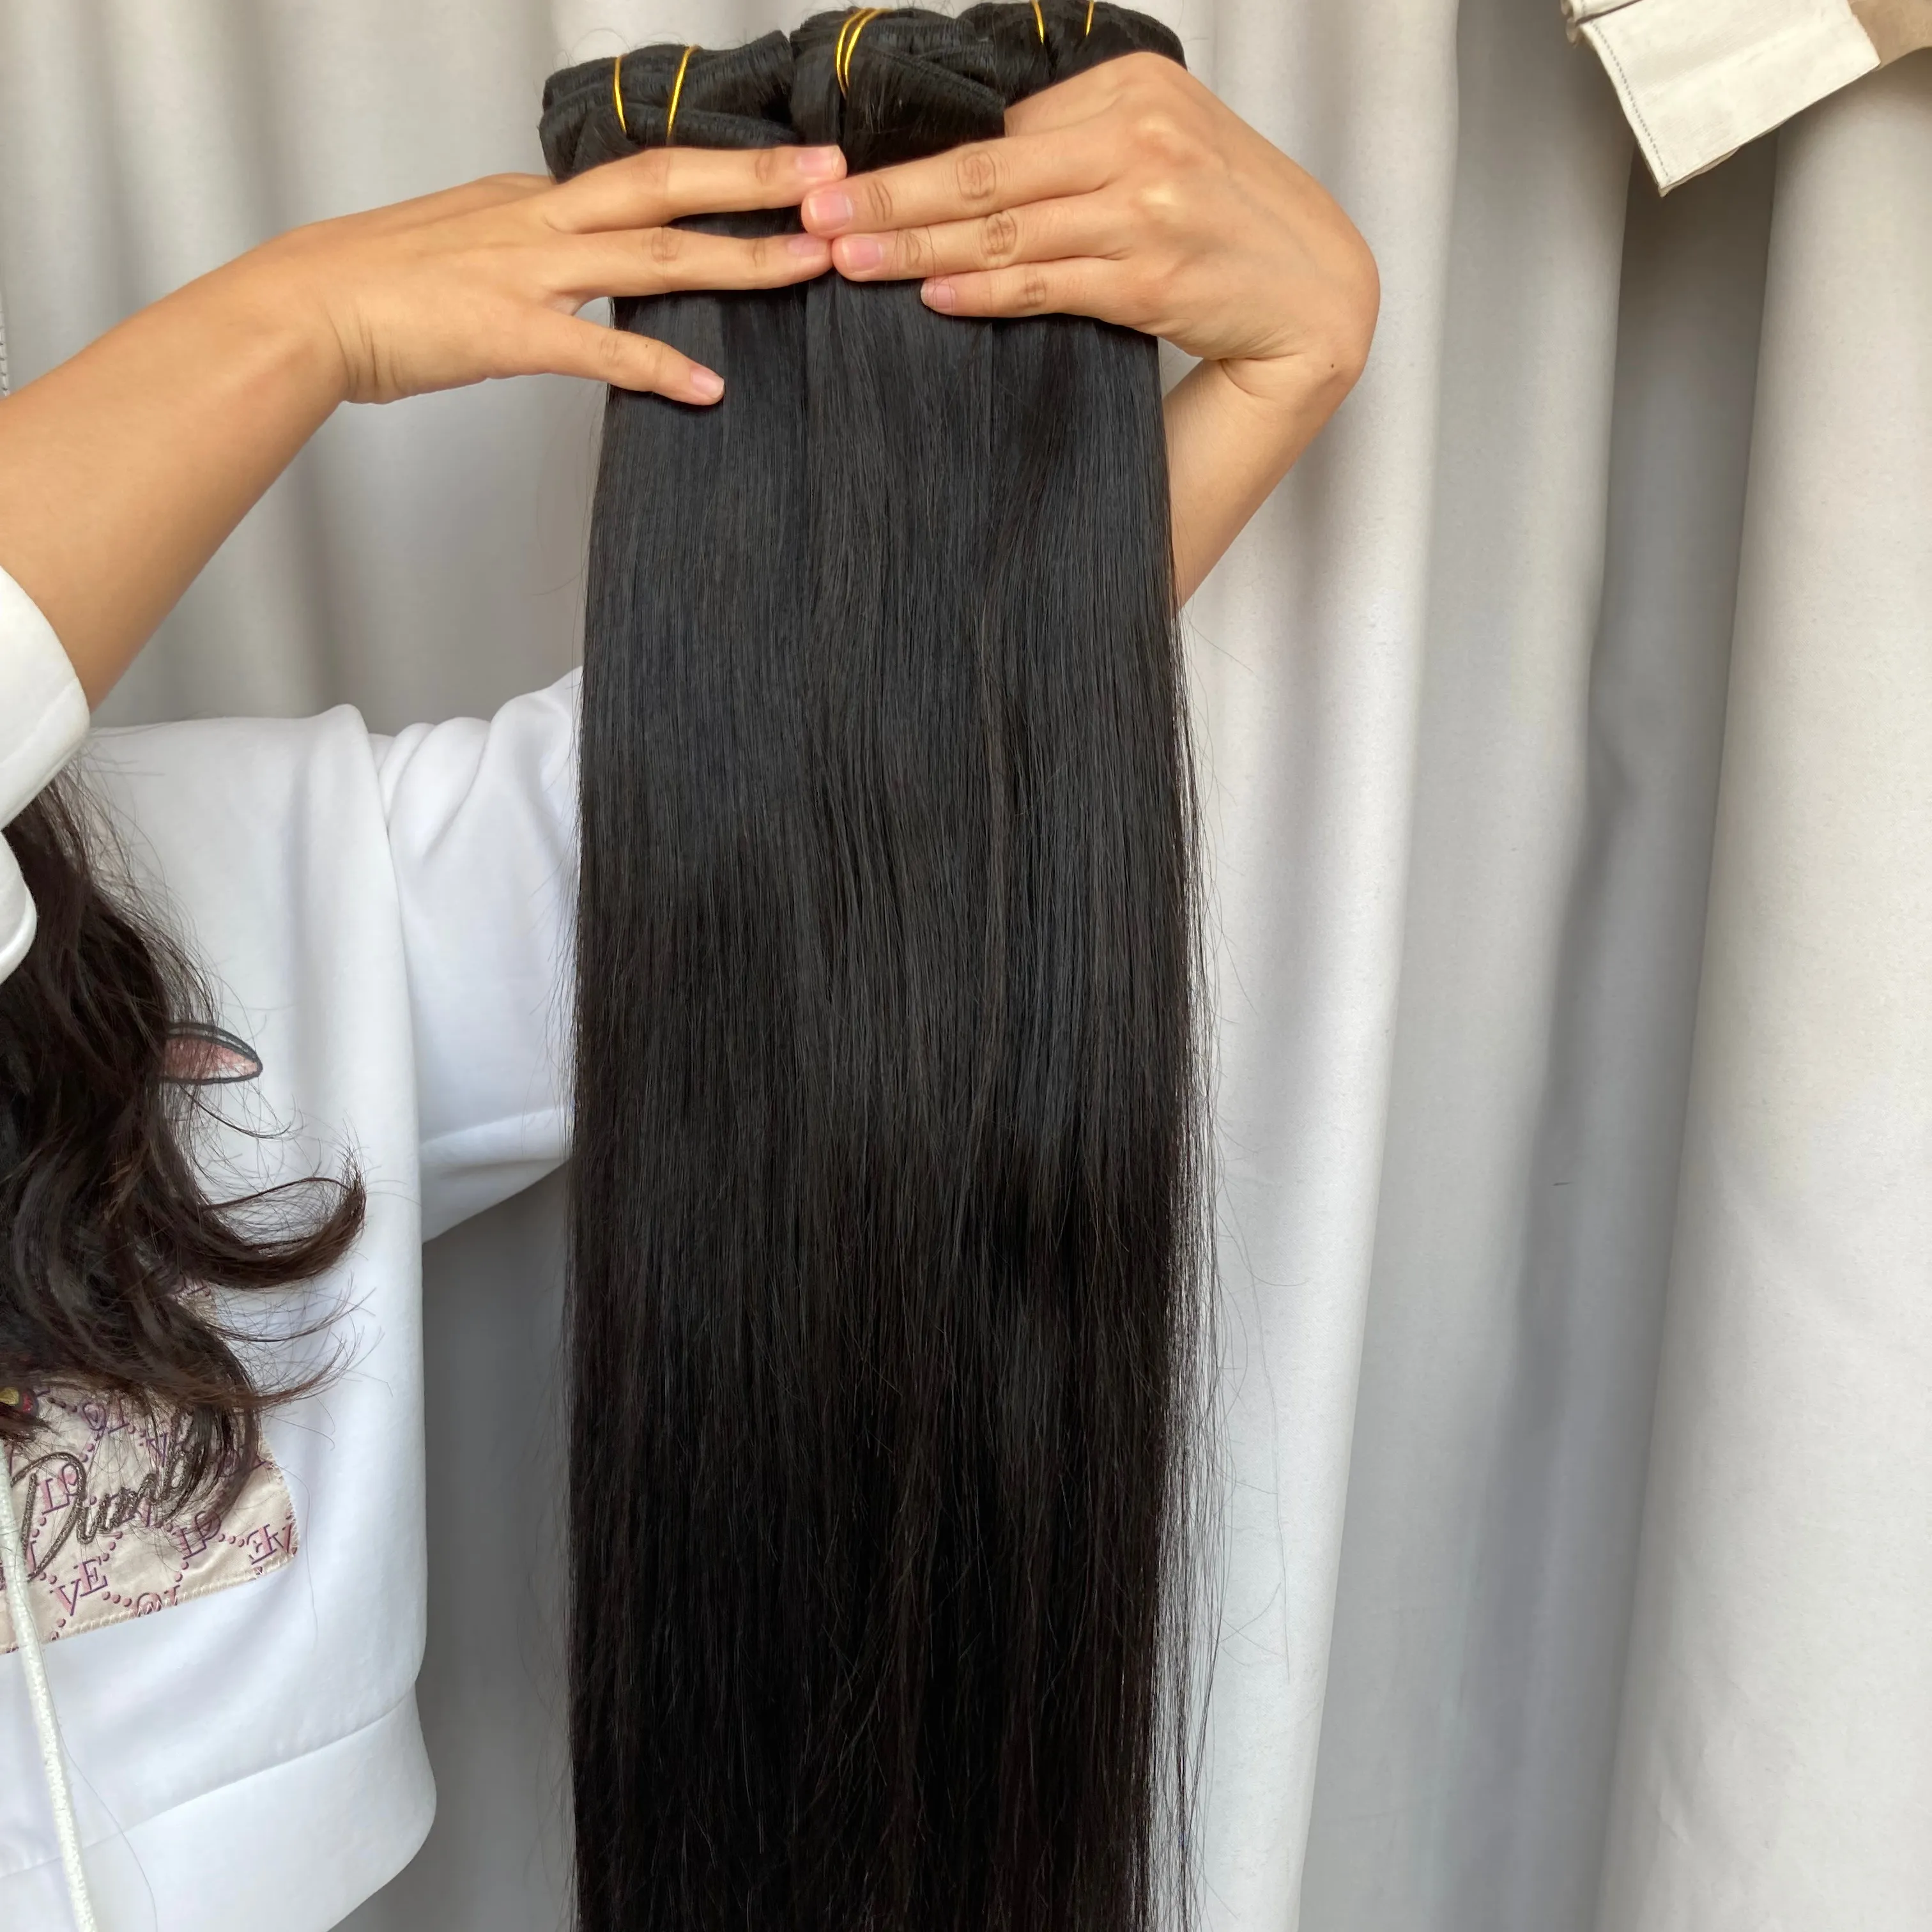 clip in hair extensions ,100% human hair natural color, double drawn clip in hair full and long